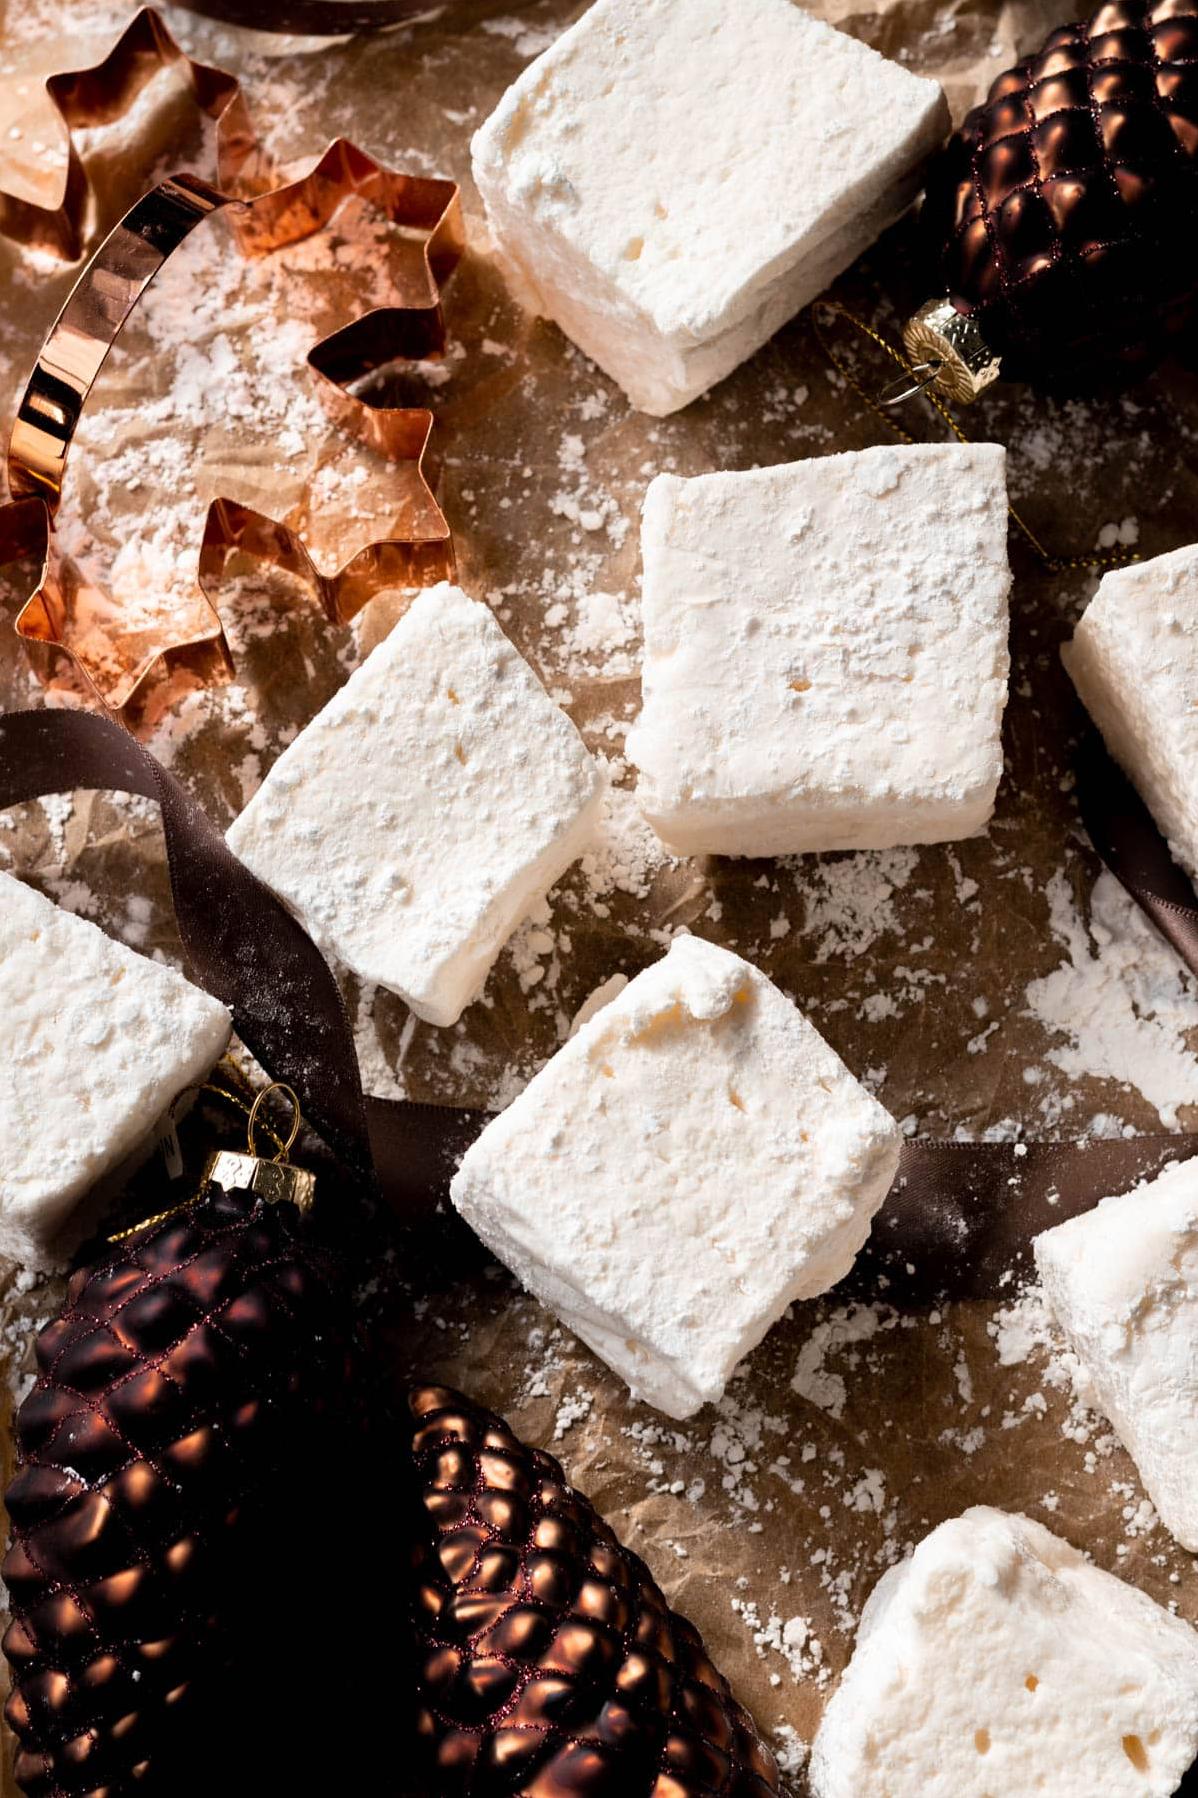  S'mores just got a whole lot better with these vegan-friendly marshmallows.